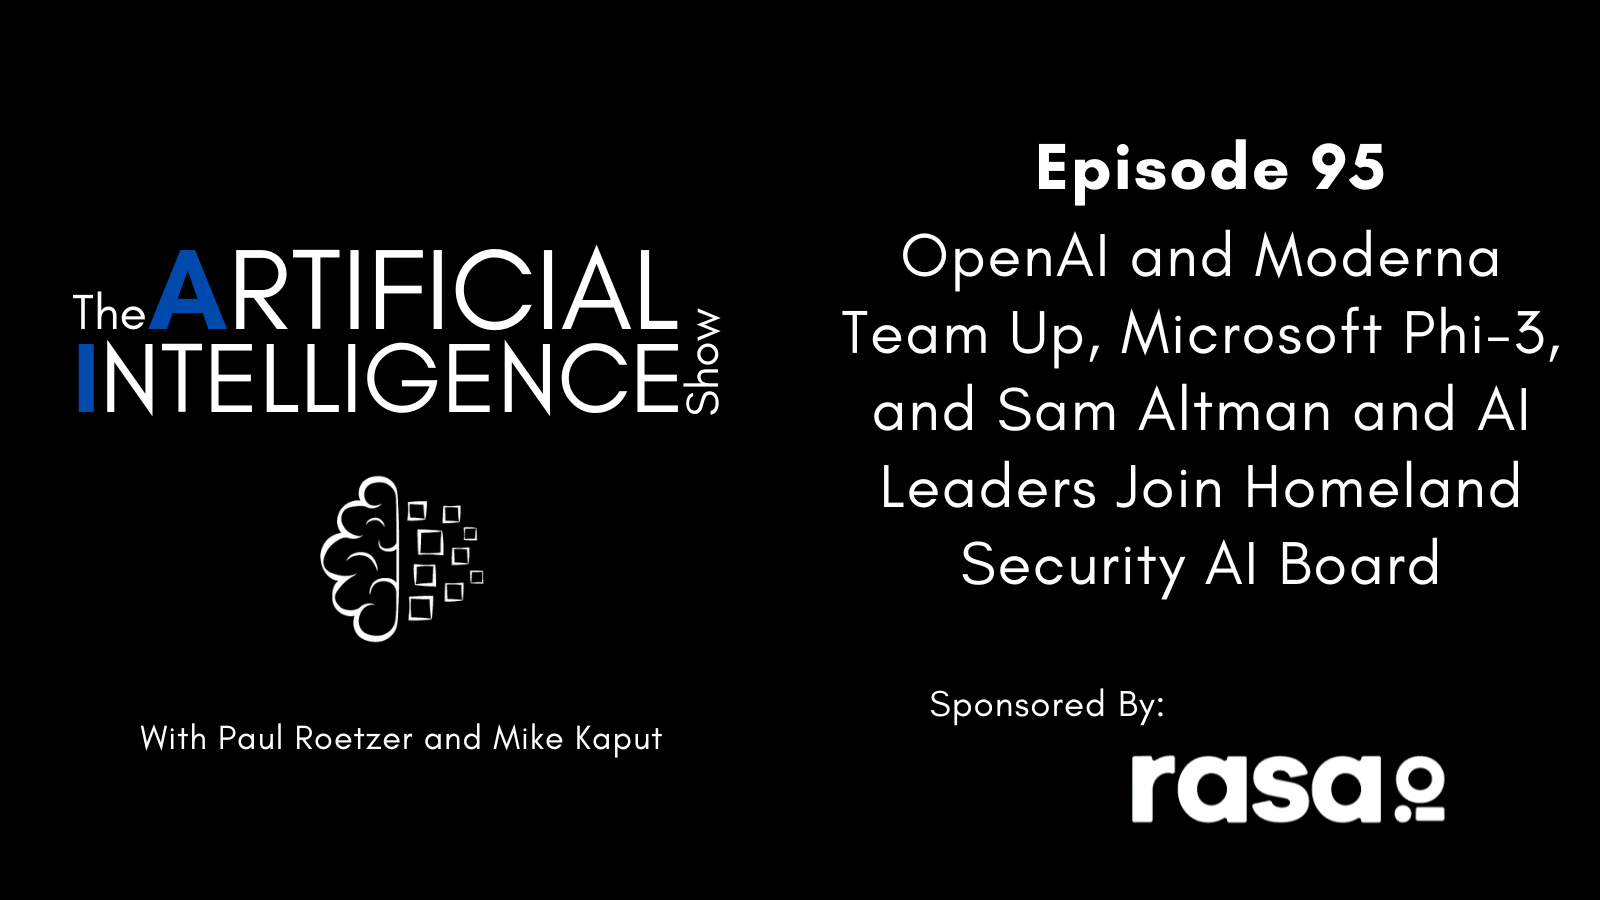 [The AI Show Episode 95]: OpenAI and Moderna Team Up, Microsoft Phi-3, and Sam Altman and AI Leaders Join Homeland Security AI Board [Video]